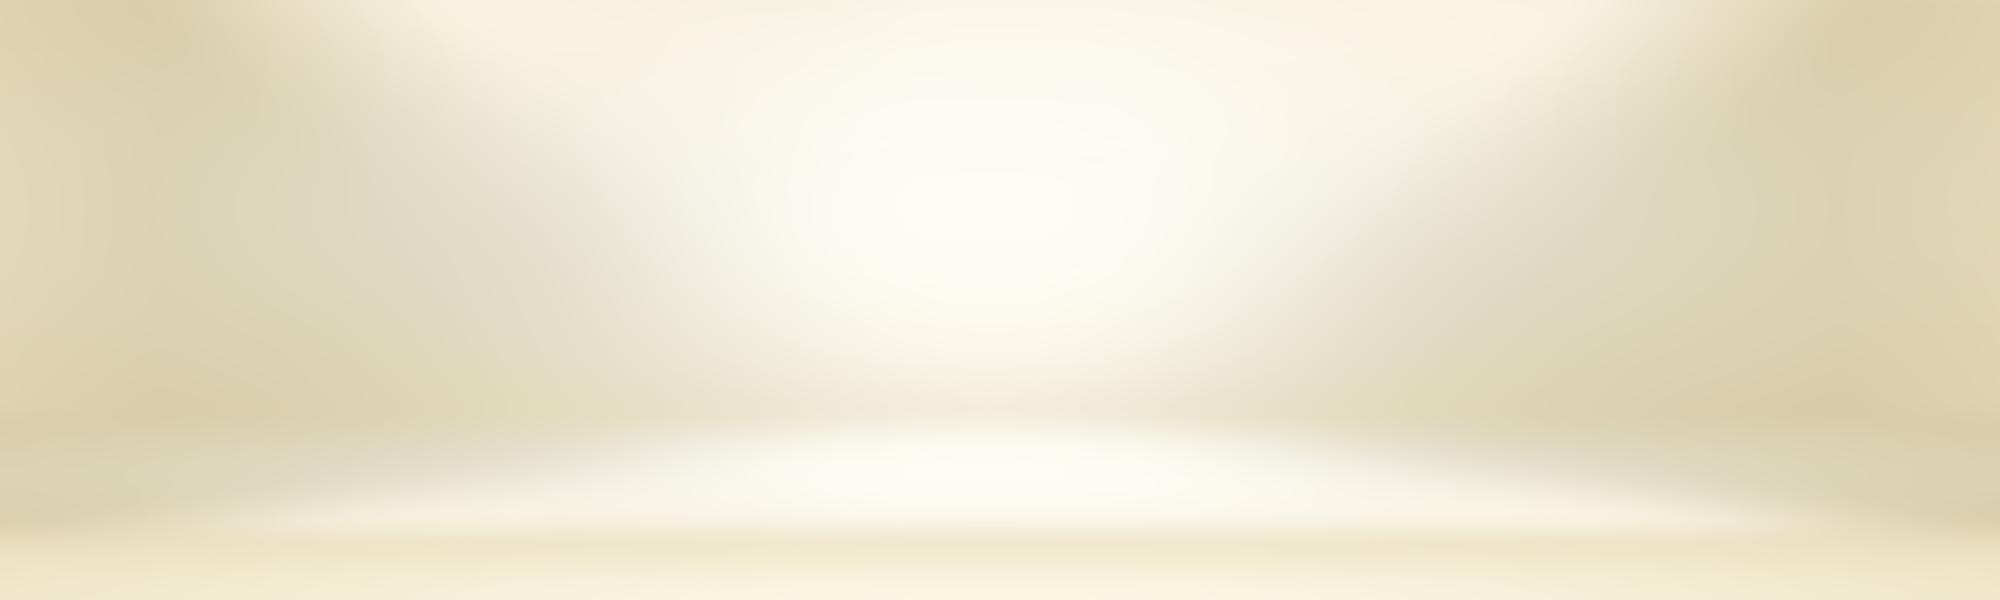 Premium Photo | A soft vintage gradient blur background with a pastel  colored well use as studio room product presen